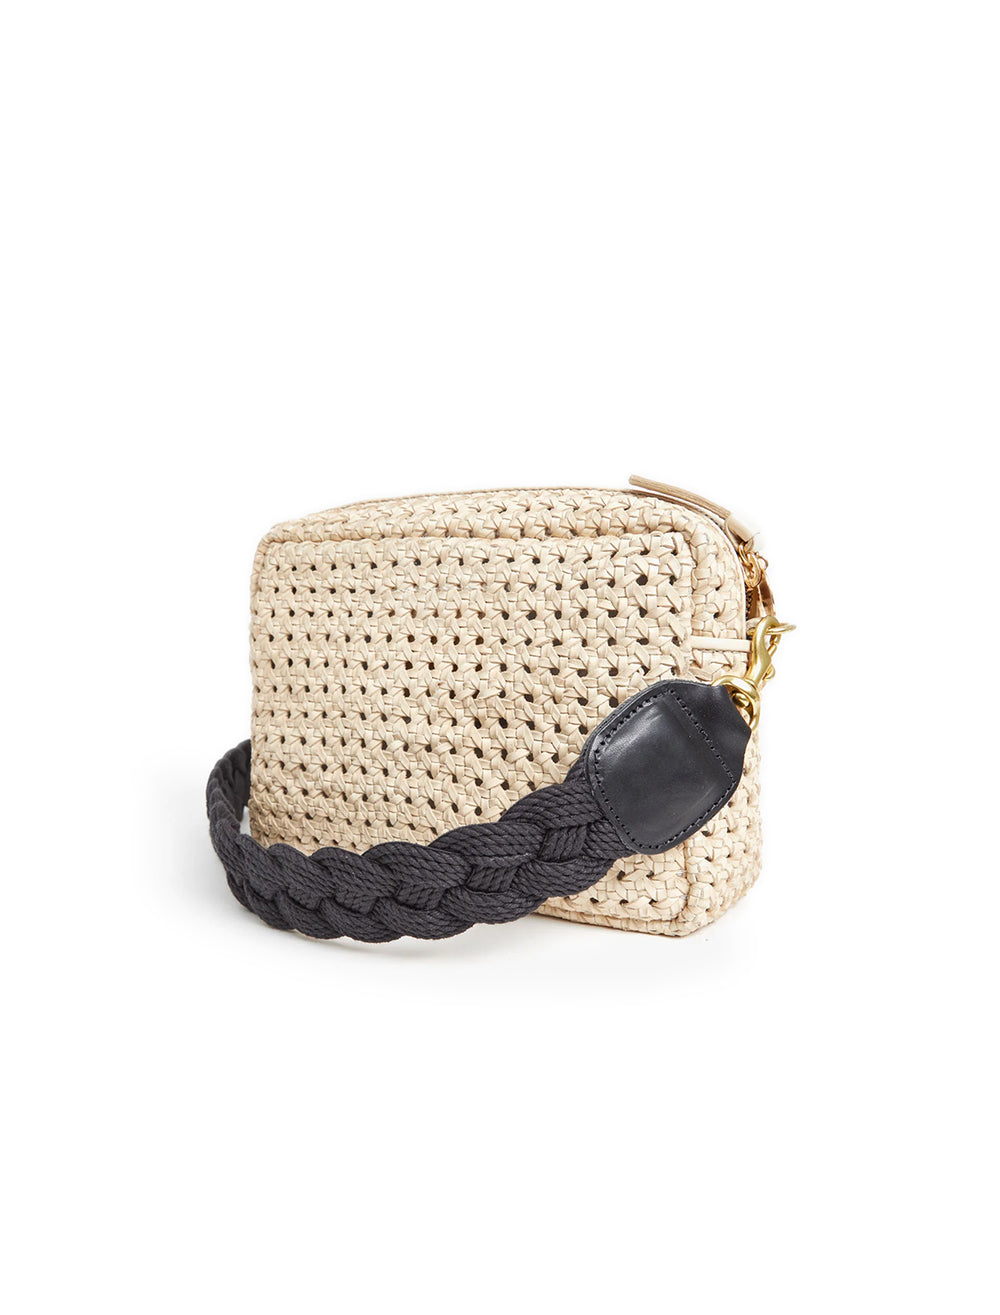 Clare V.'s braided rope crossbody strap in black on a cream bag.